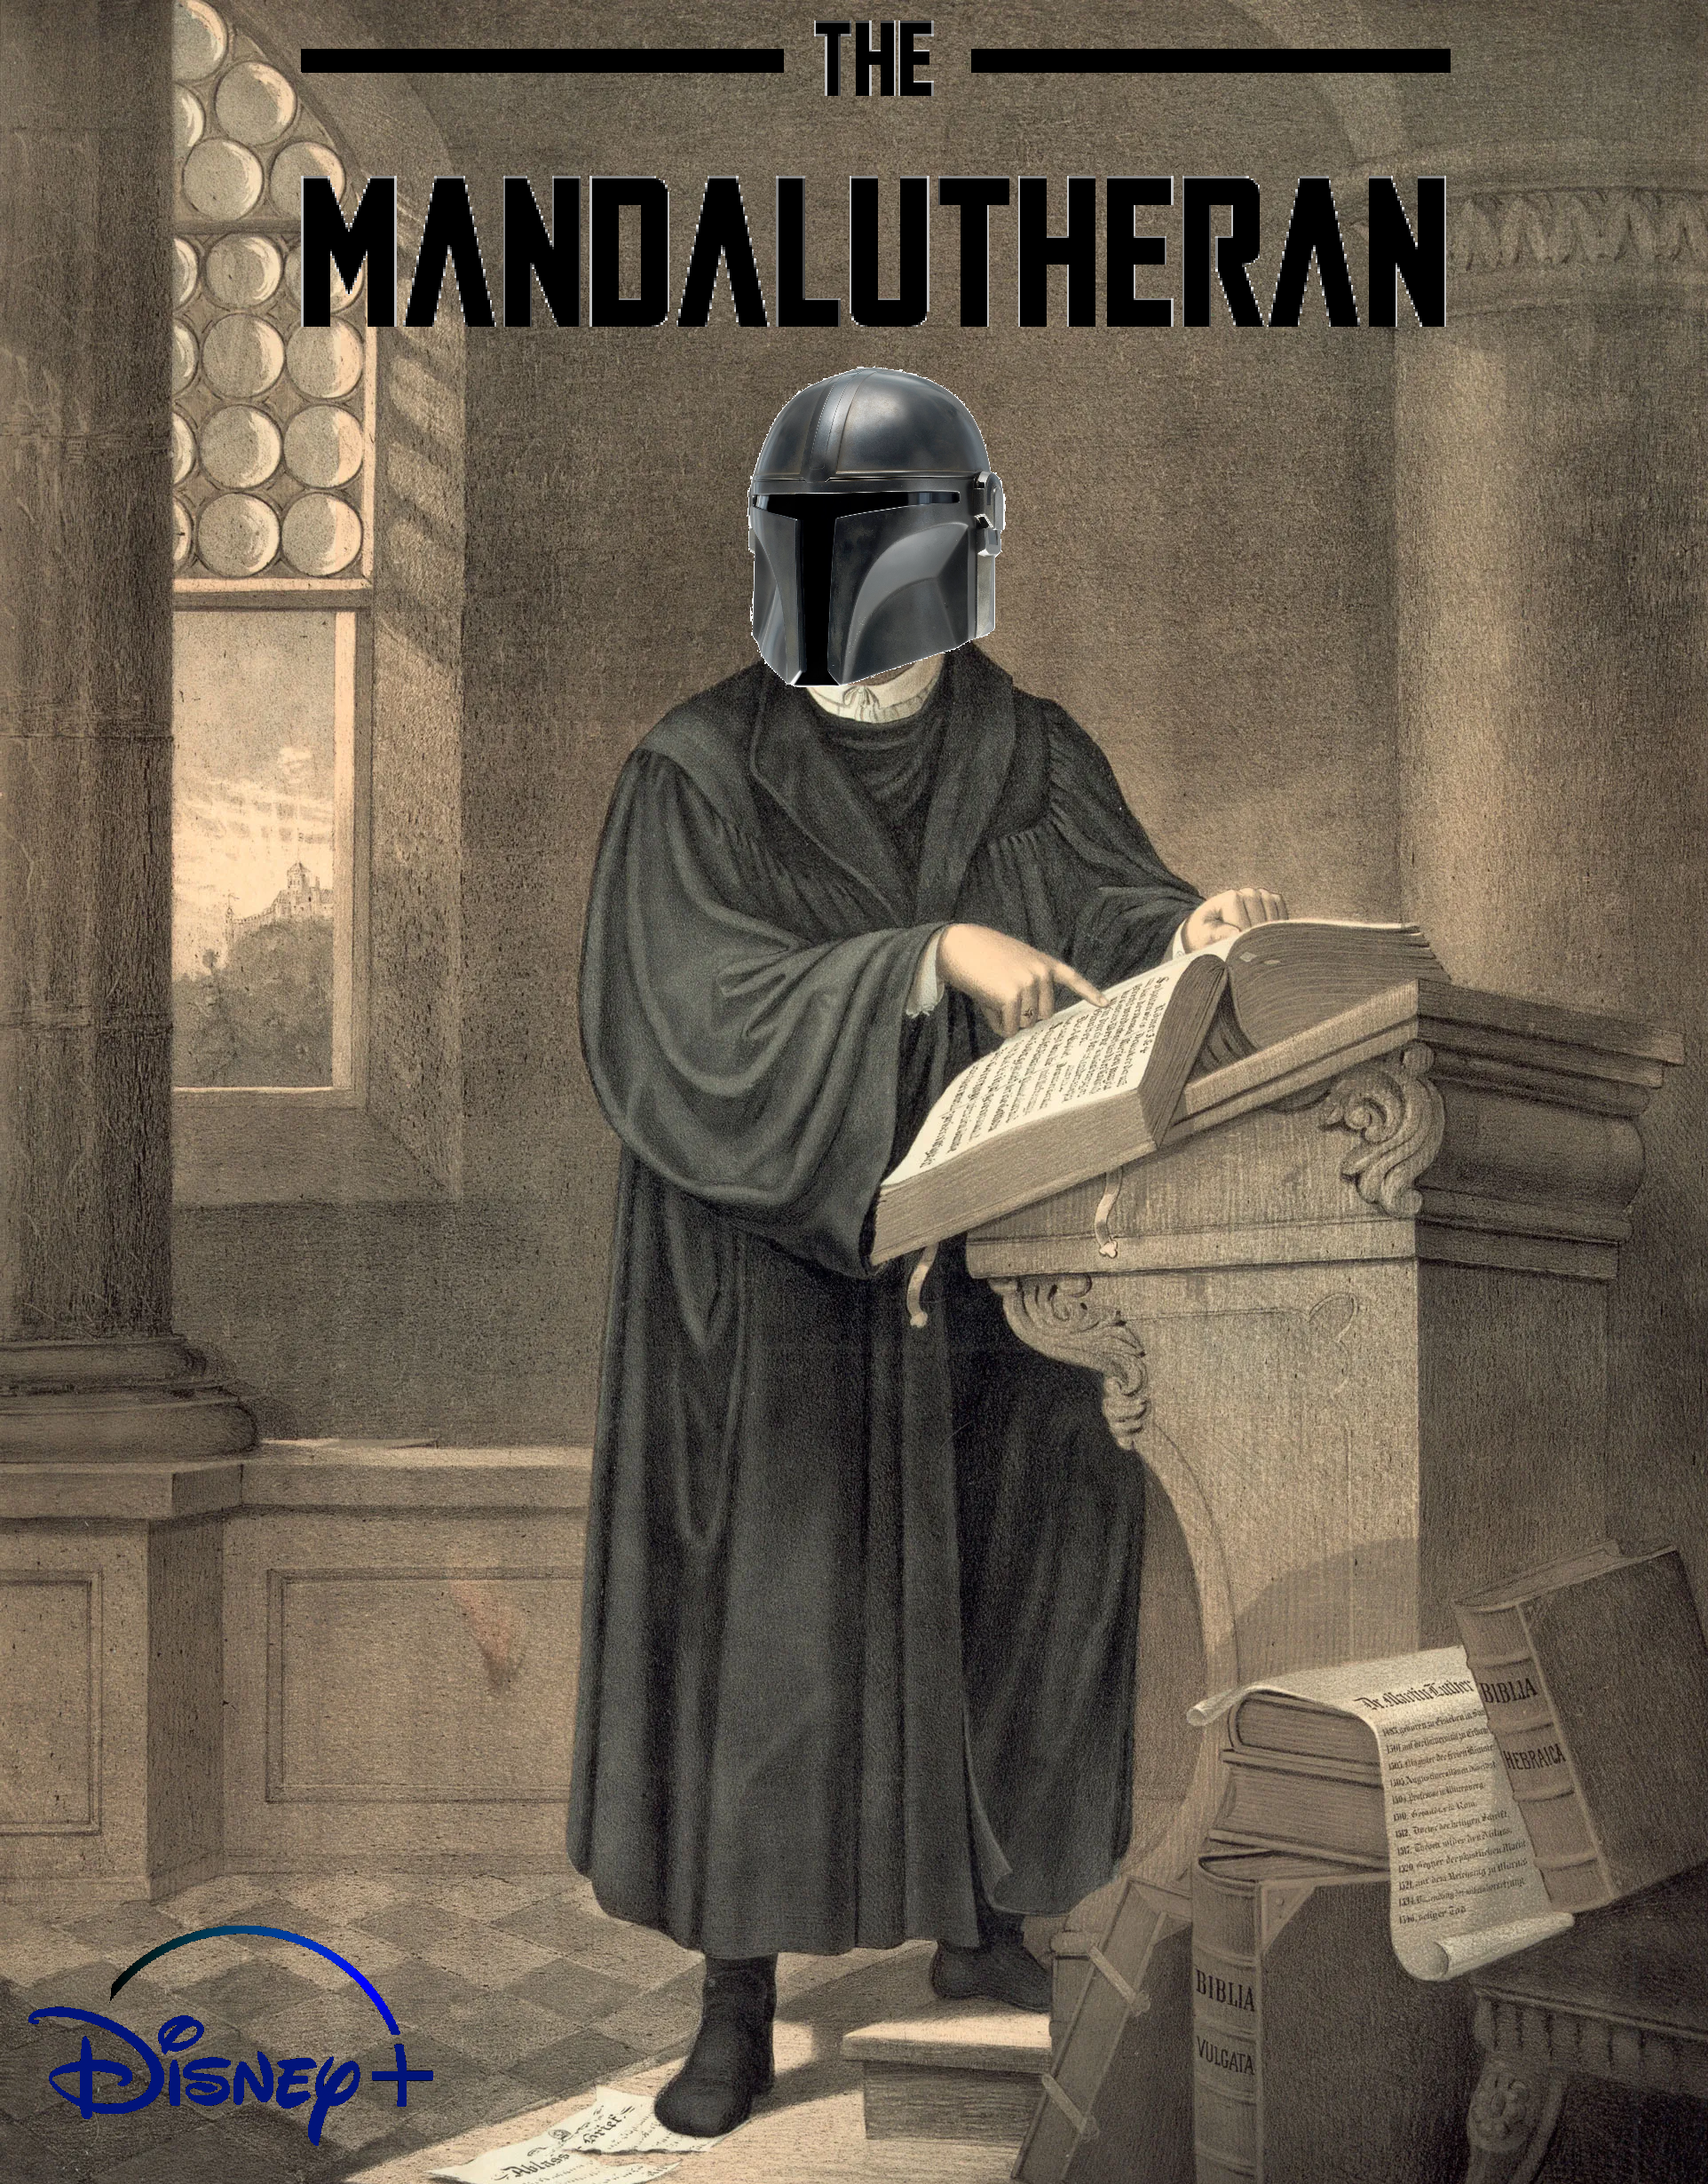 The Mandalutheran Poster.png